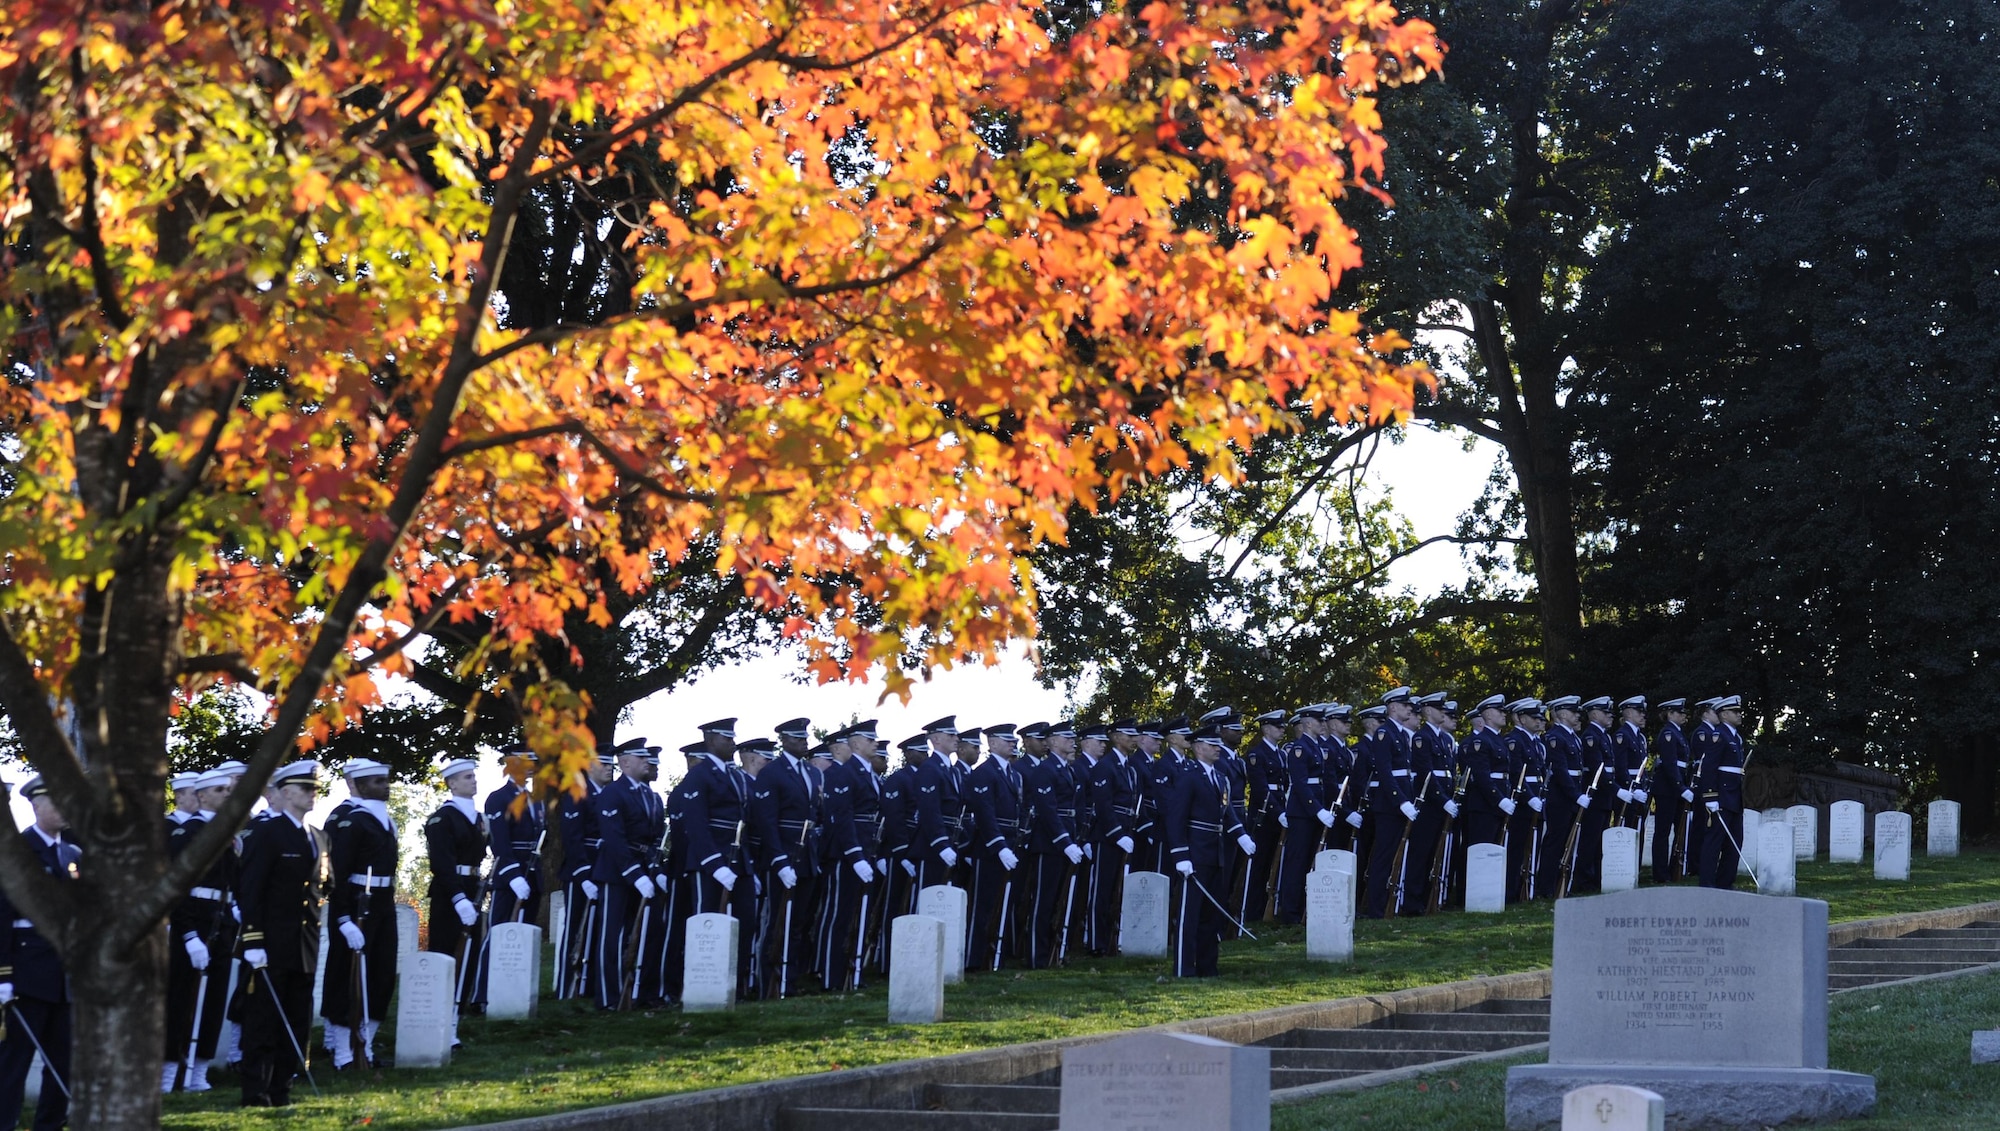 The United States Air Force and Navy Honor Guard Drill Team pay tribute to retired Gen. David C. Jones as he’s laid to rest Oct. 25, 2013, at Arlington National Cemetery, Va. Jones served four years as Air Force chief of staff from 1974 to 1978 until he was appointed as chairman of the Joint Chiefs of Staff, June 21, 1978. As chairman he served as the senior military adviser to the president, the National Security Council and the secretary of Defense.  During the Korean War, Jones was assigned to a bombardment squadron where he accumulated more than 300 flight hours on missions over North Korea. 